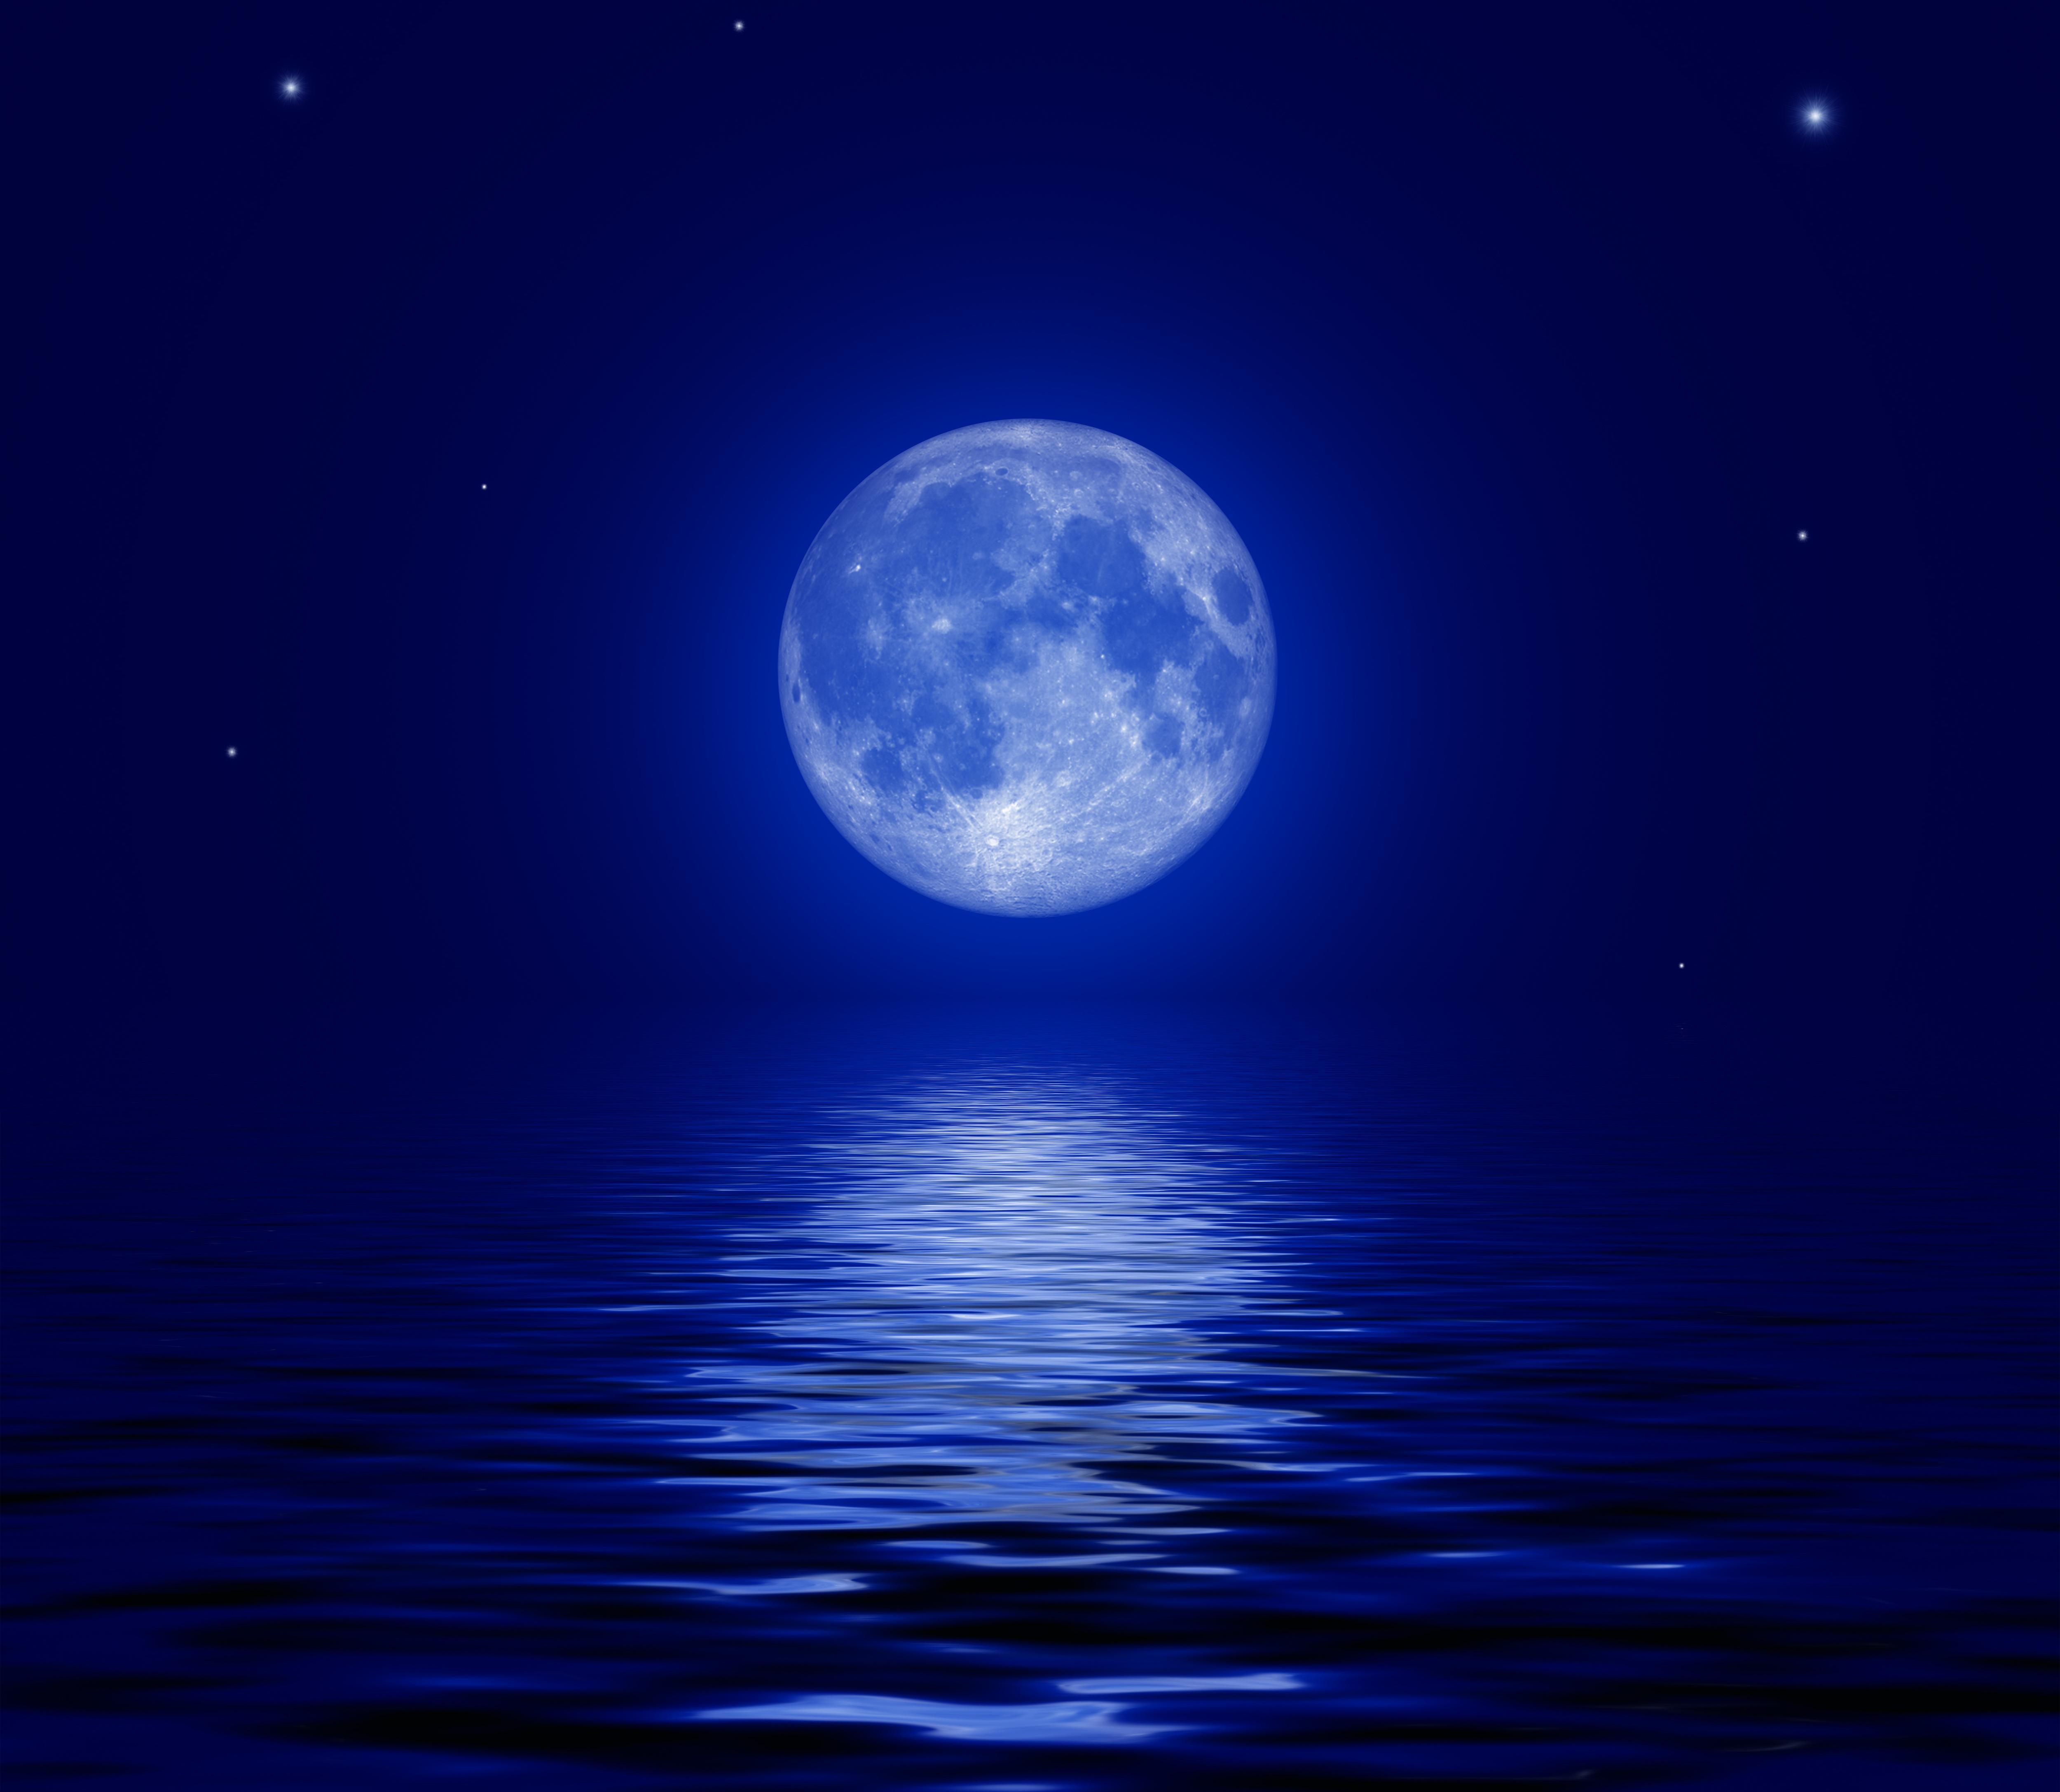 Full Moon over the Sea 4k Ultra HD Wallpaper. Background